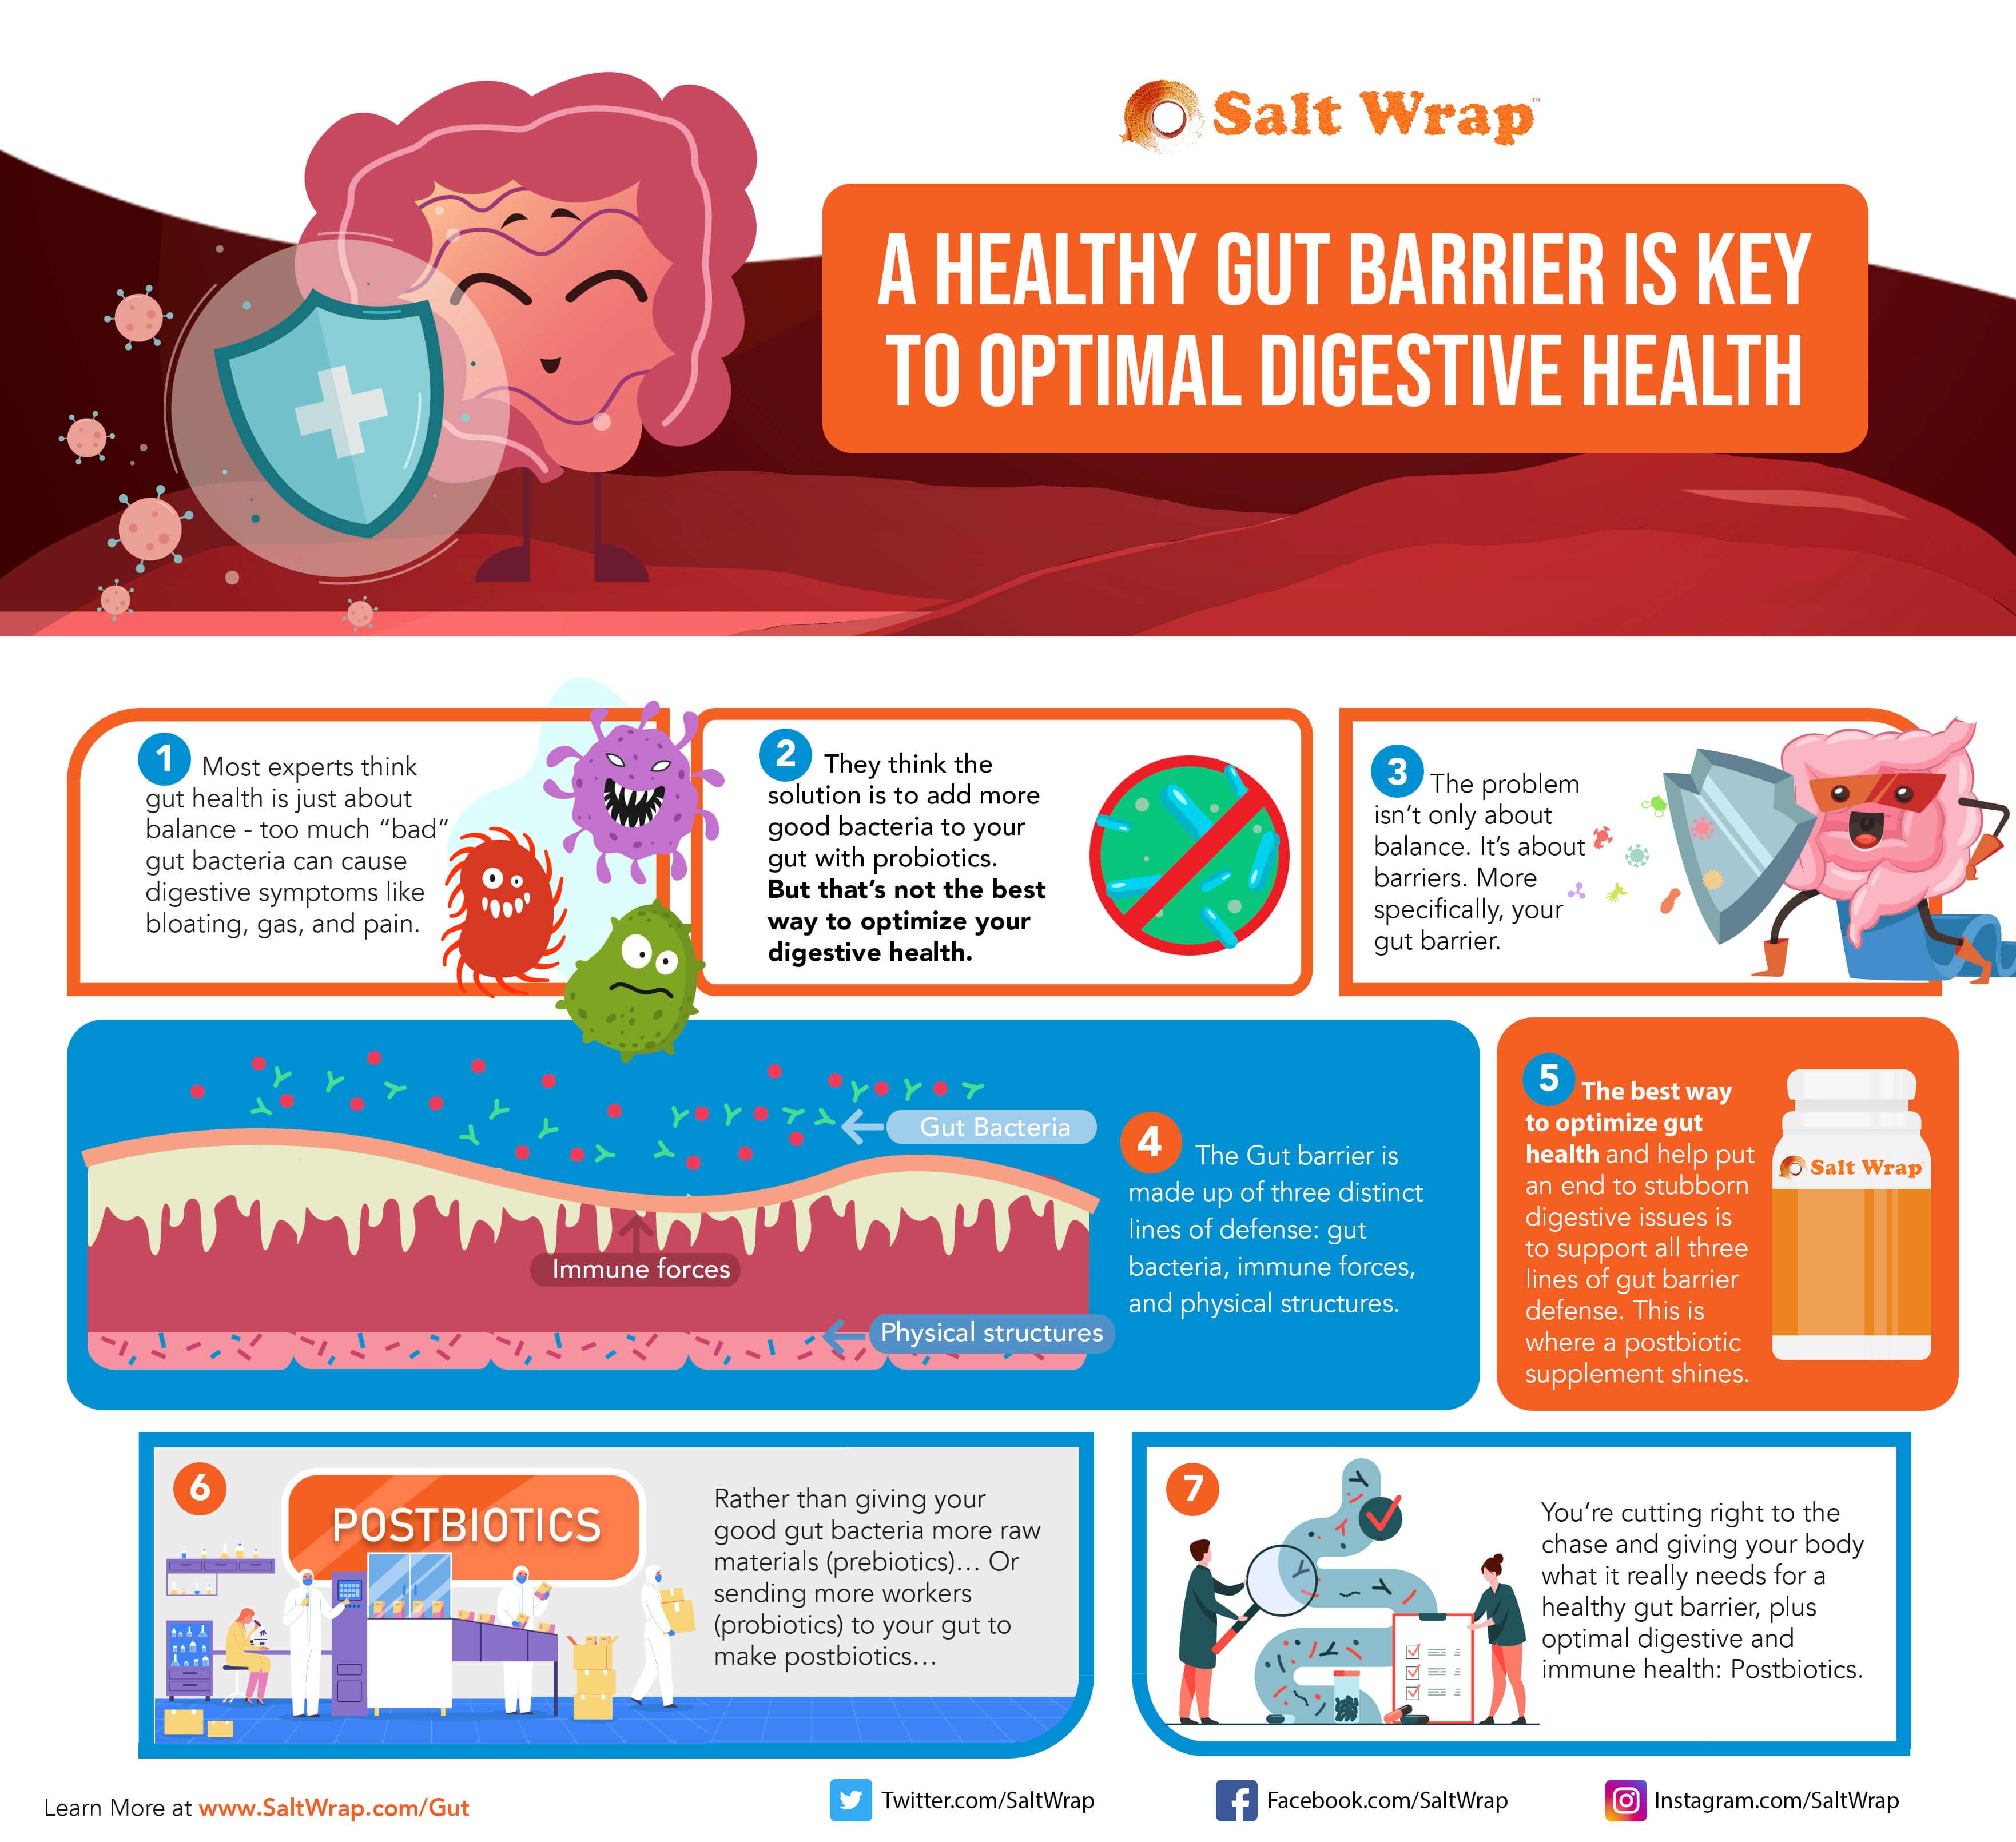 Complete gut health is impossible without a healthy gut barrier. It's the key to optimizing digestive health.